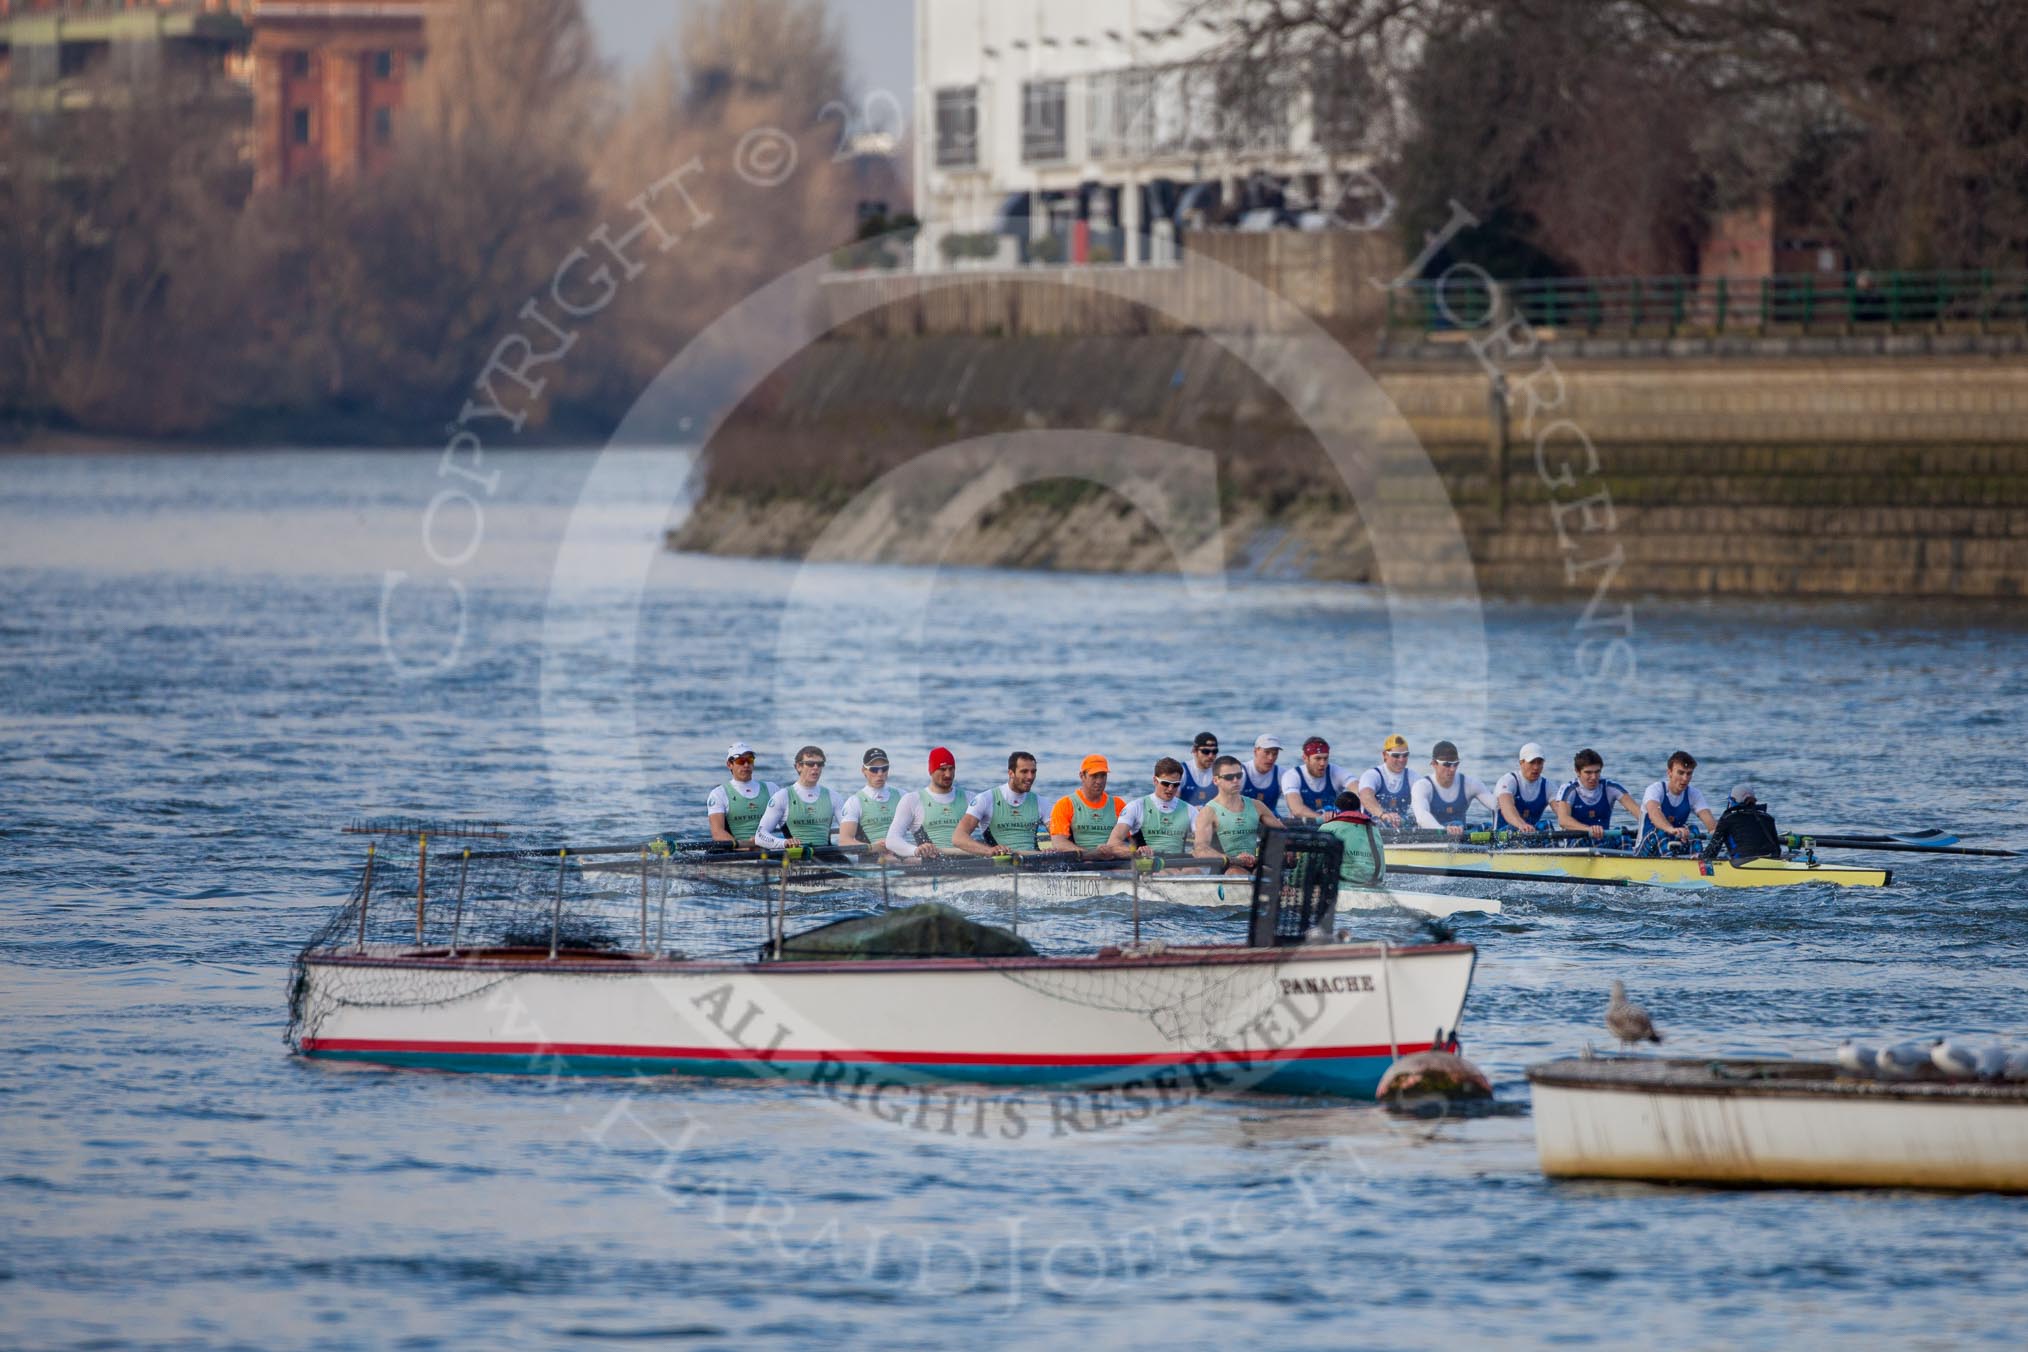 The Boat Race season 2013 - fixture CUBC vs Leander: The Goldie vs Imperial BC fixture..
River Thames Tideway between Putney Bridge and Mortlake,
London SW15,

United Kingdom,
on 02 March 2013 at 15:24, image #60